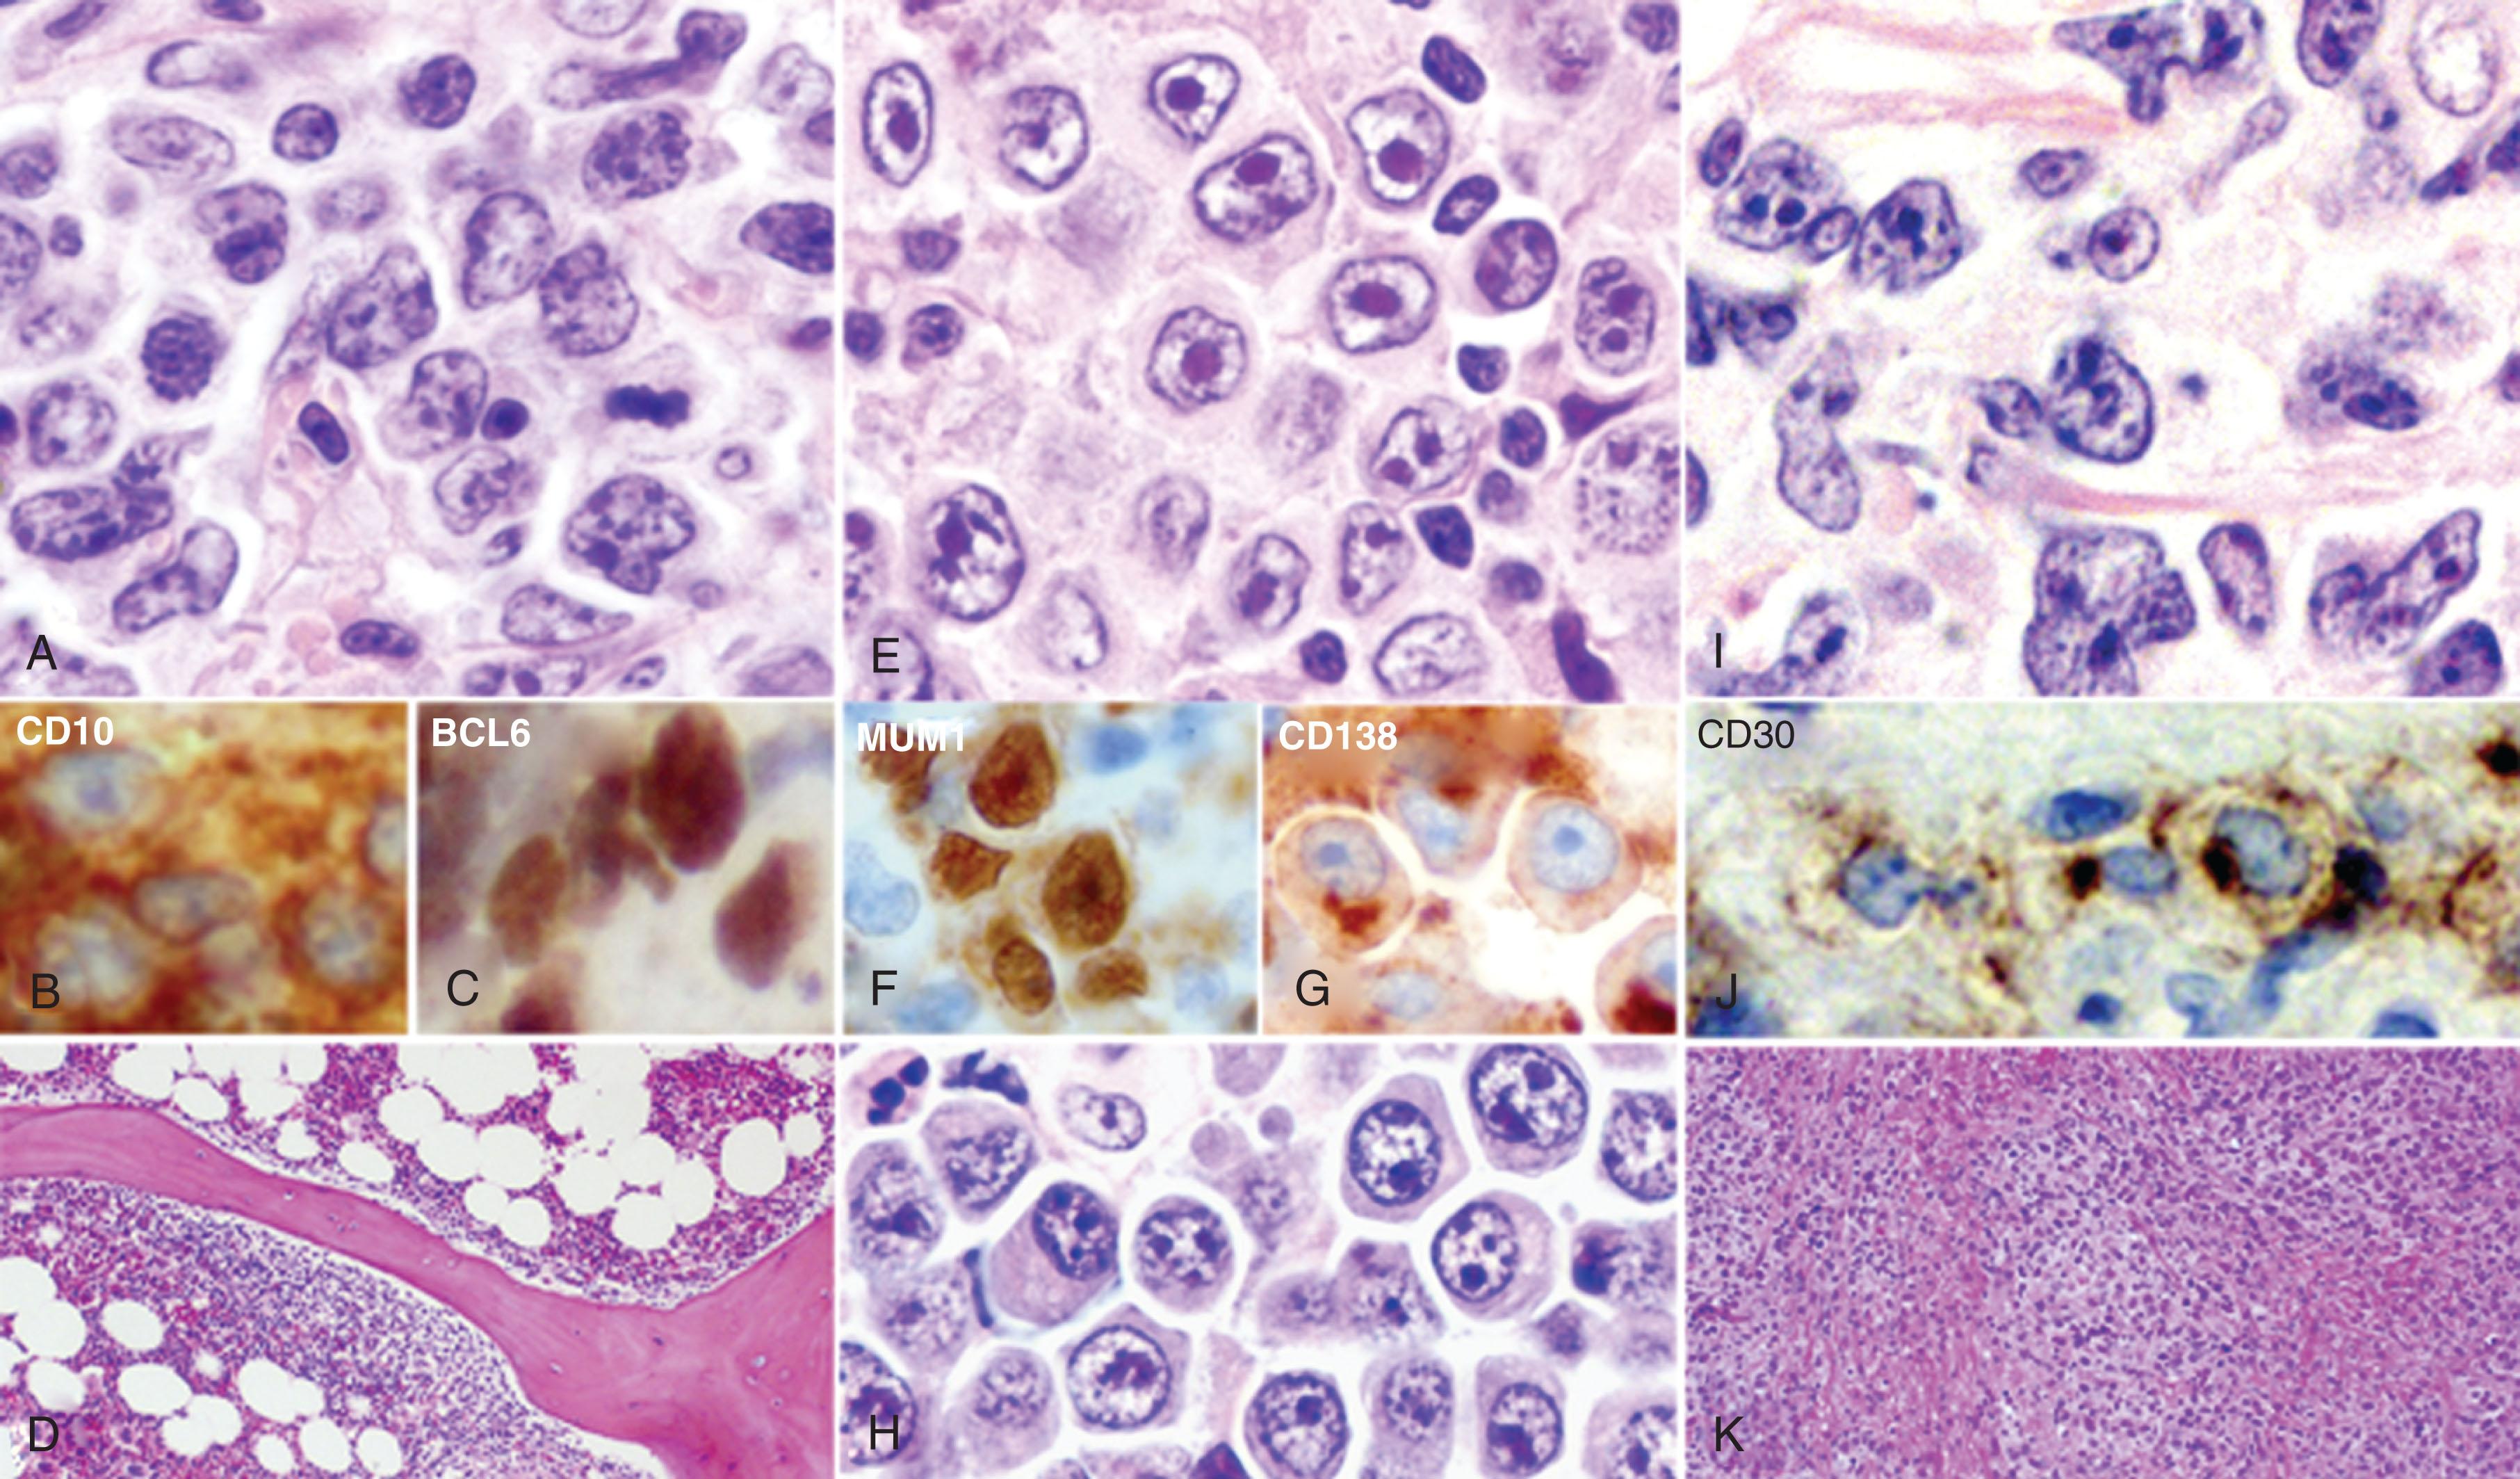 Figure 81.5, THREE TYPES OF DIFFUSE LARGE B-CELL LYMPHOMA DELINEATED BY HISTOLOGIC PATTERNS.